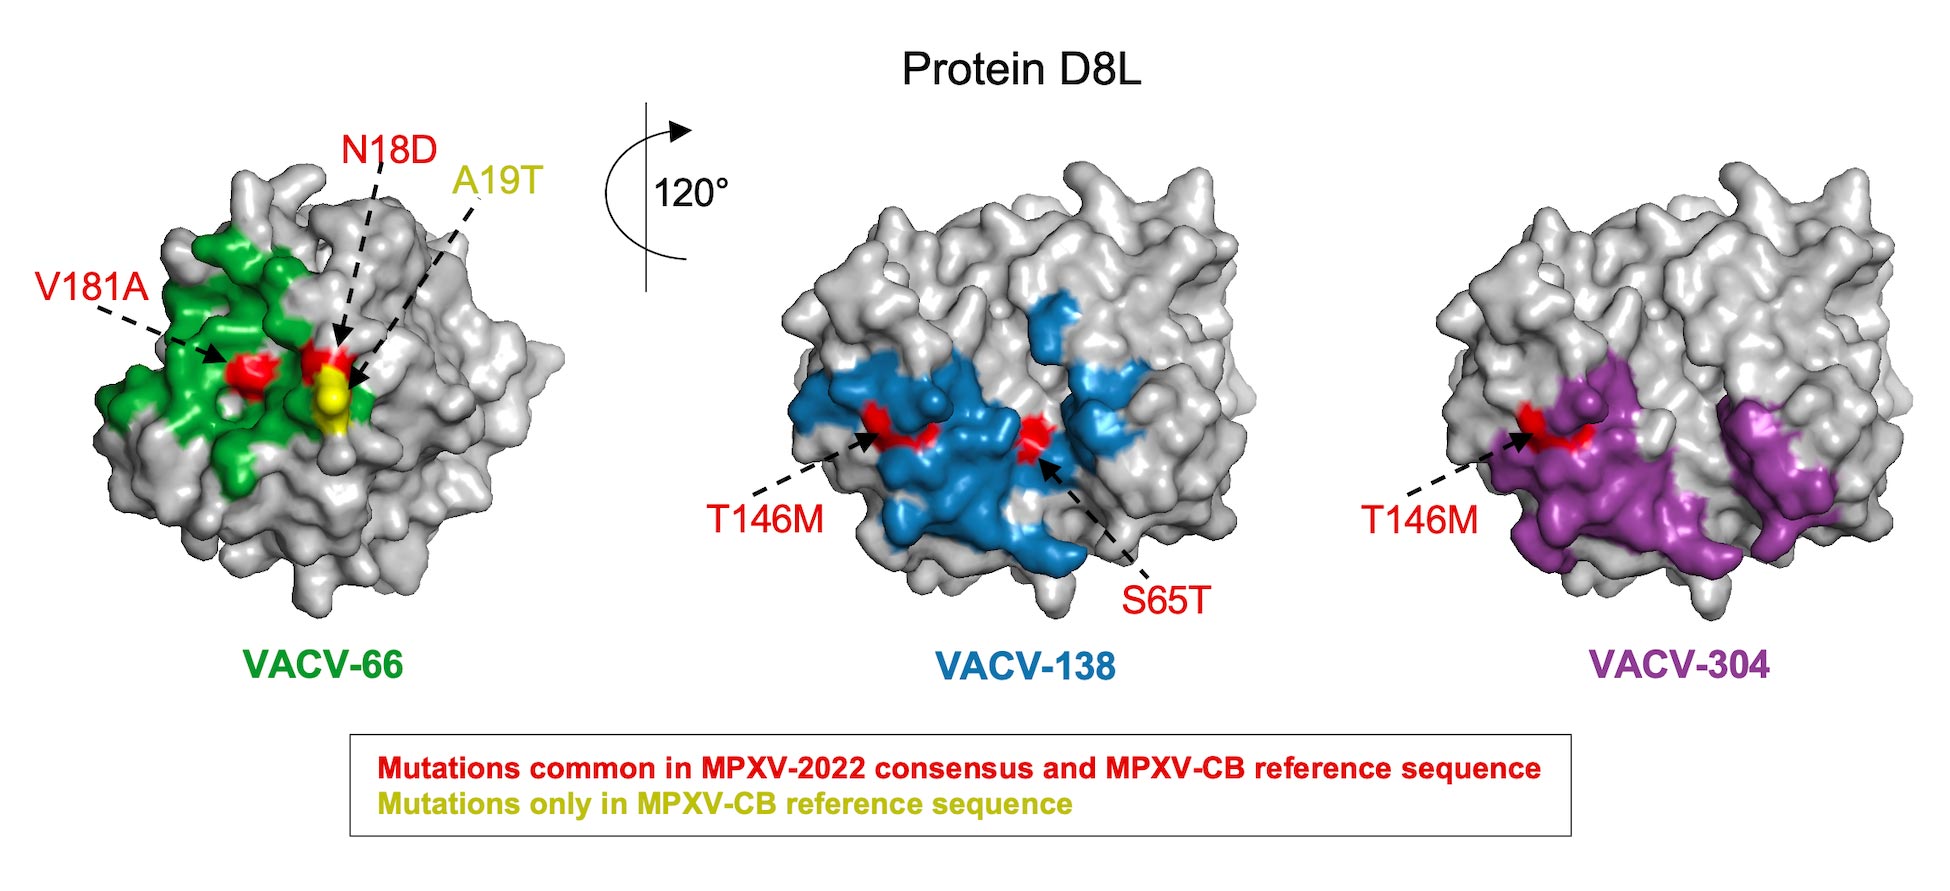 Figure 2. MPXV-2022 does not comprise any new mutations relative to the MPXV-CB reference sequence in the epitopes of the three known neutralizing antibodies (VACV-66, VACV-138, and VACV-304) in the D8L protein of VACV.